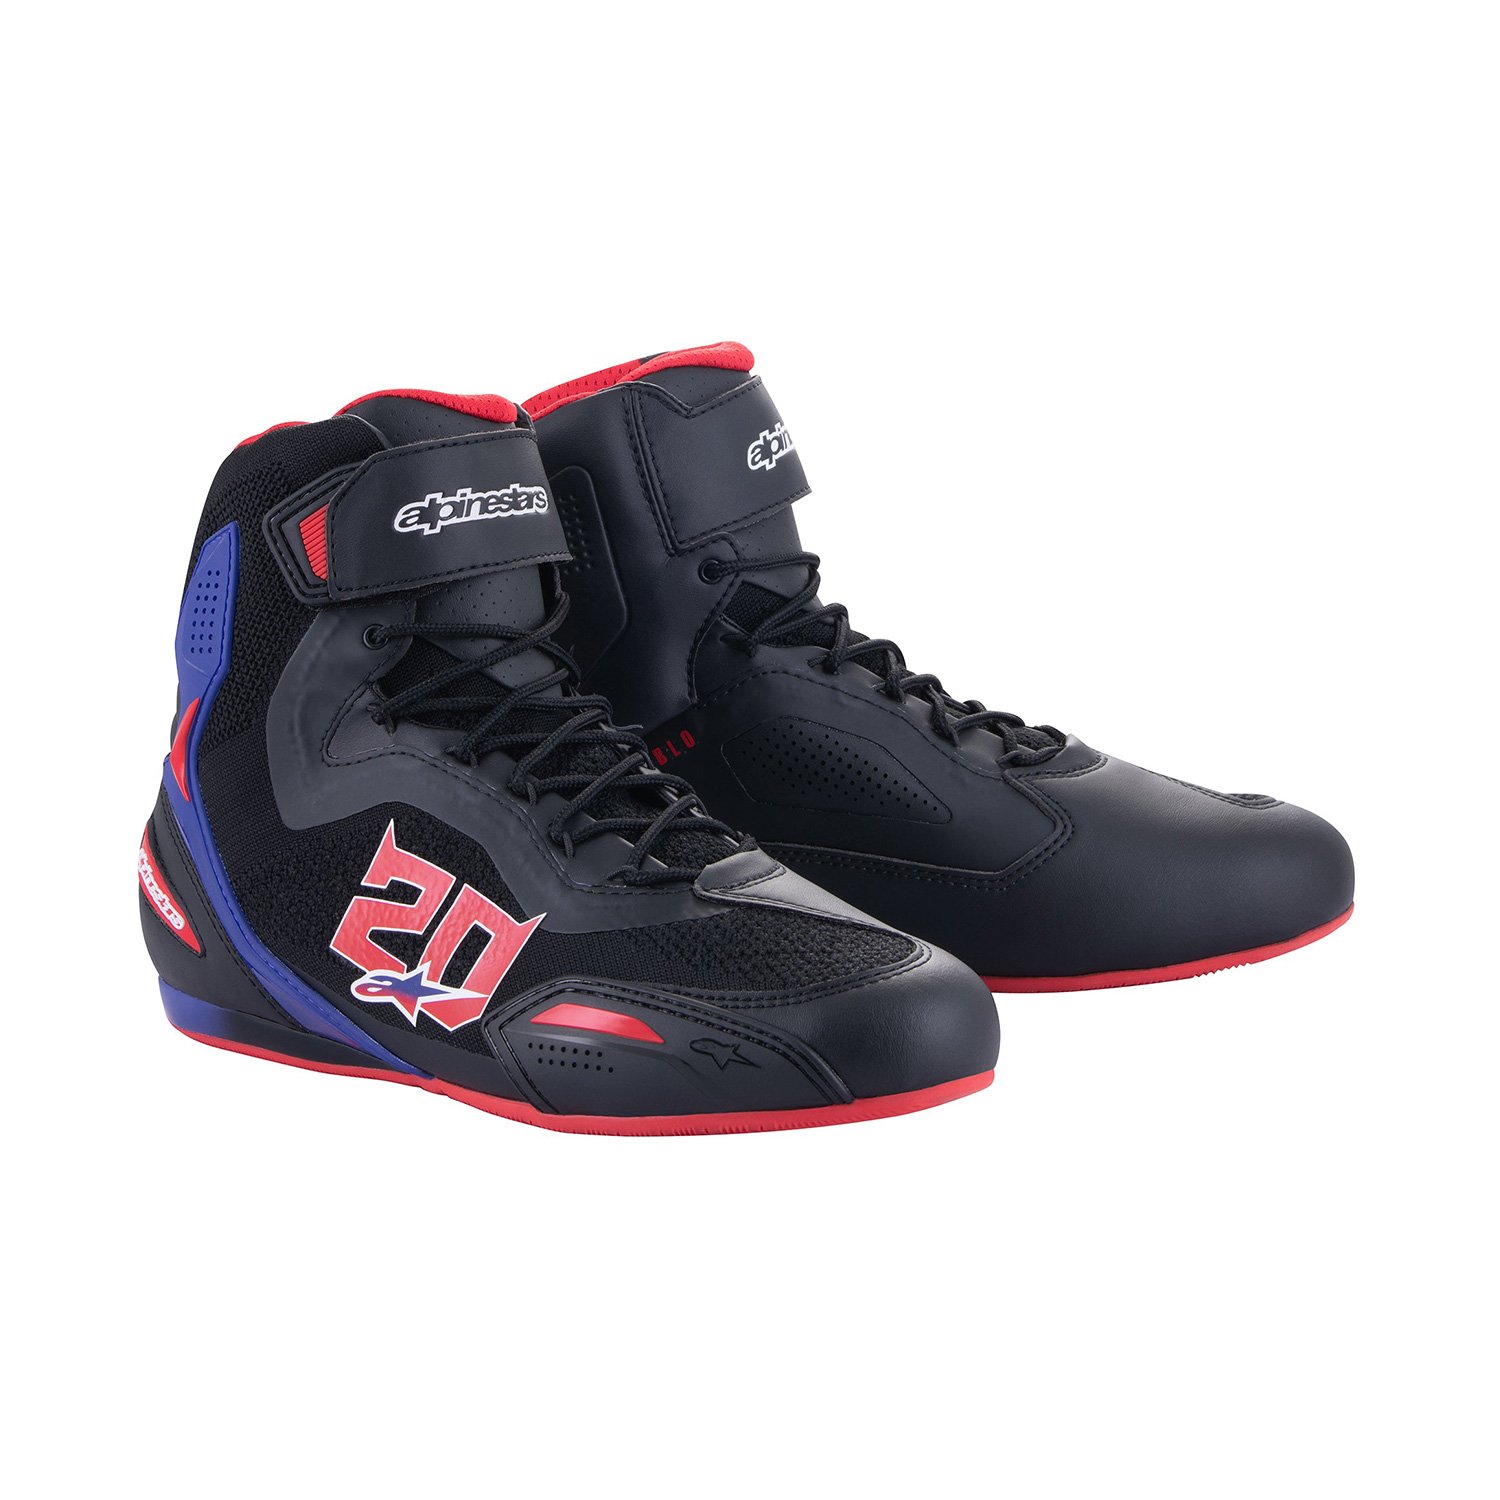 Image of Alpinestars FQ20 Faster-3 Rideknit Noir Bright Rouge Bleu Chaussures Taille US 8